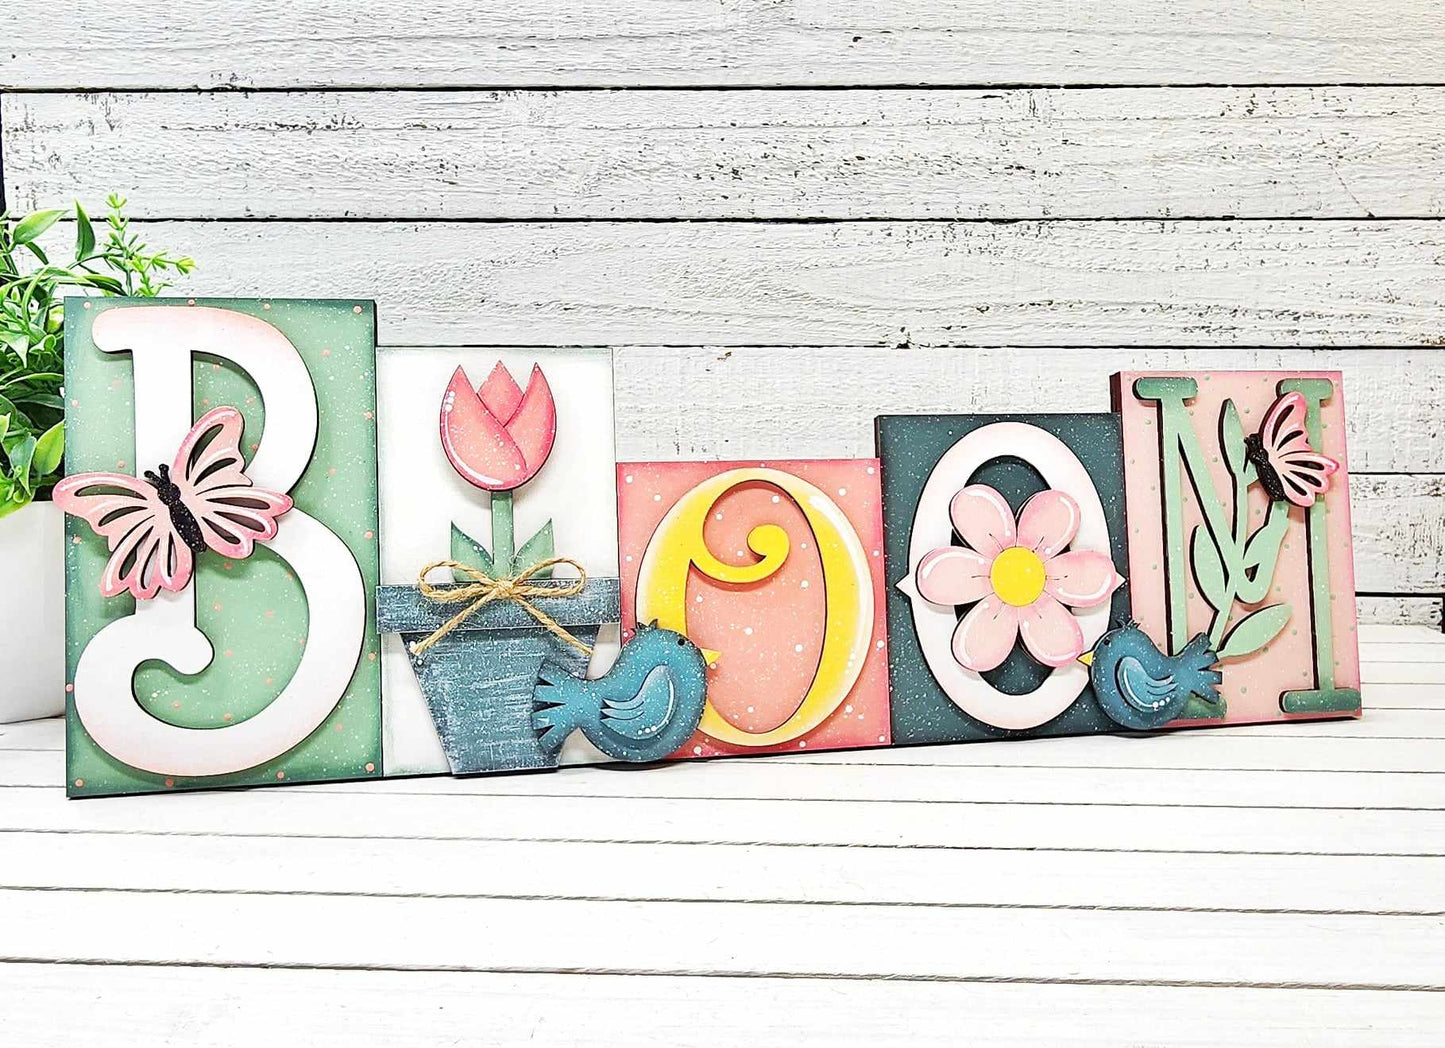 Bloom Word Stander, unpainted wooden cutouts - diy kit ready for you to paint, includes the circle